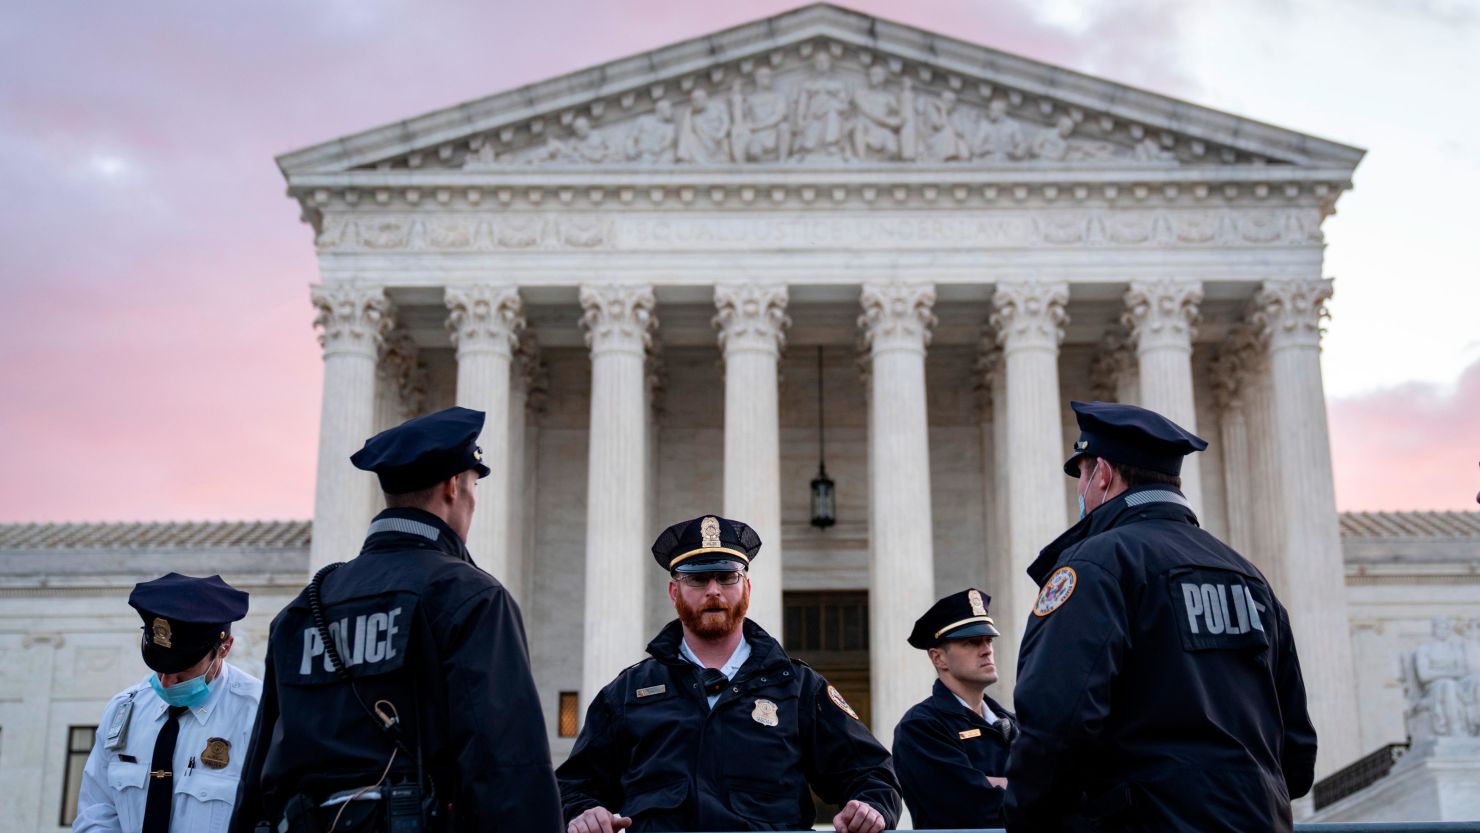 In this November 1, 2021, file photo, Supreme Court police officers set up security barricades outside the US Supreme Court building before the justices hear arguments in a challenge to a controversial Texas abortion law.